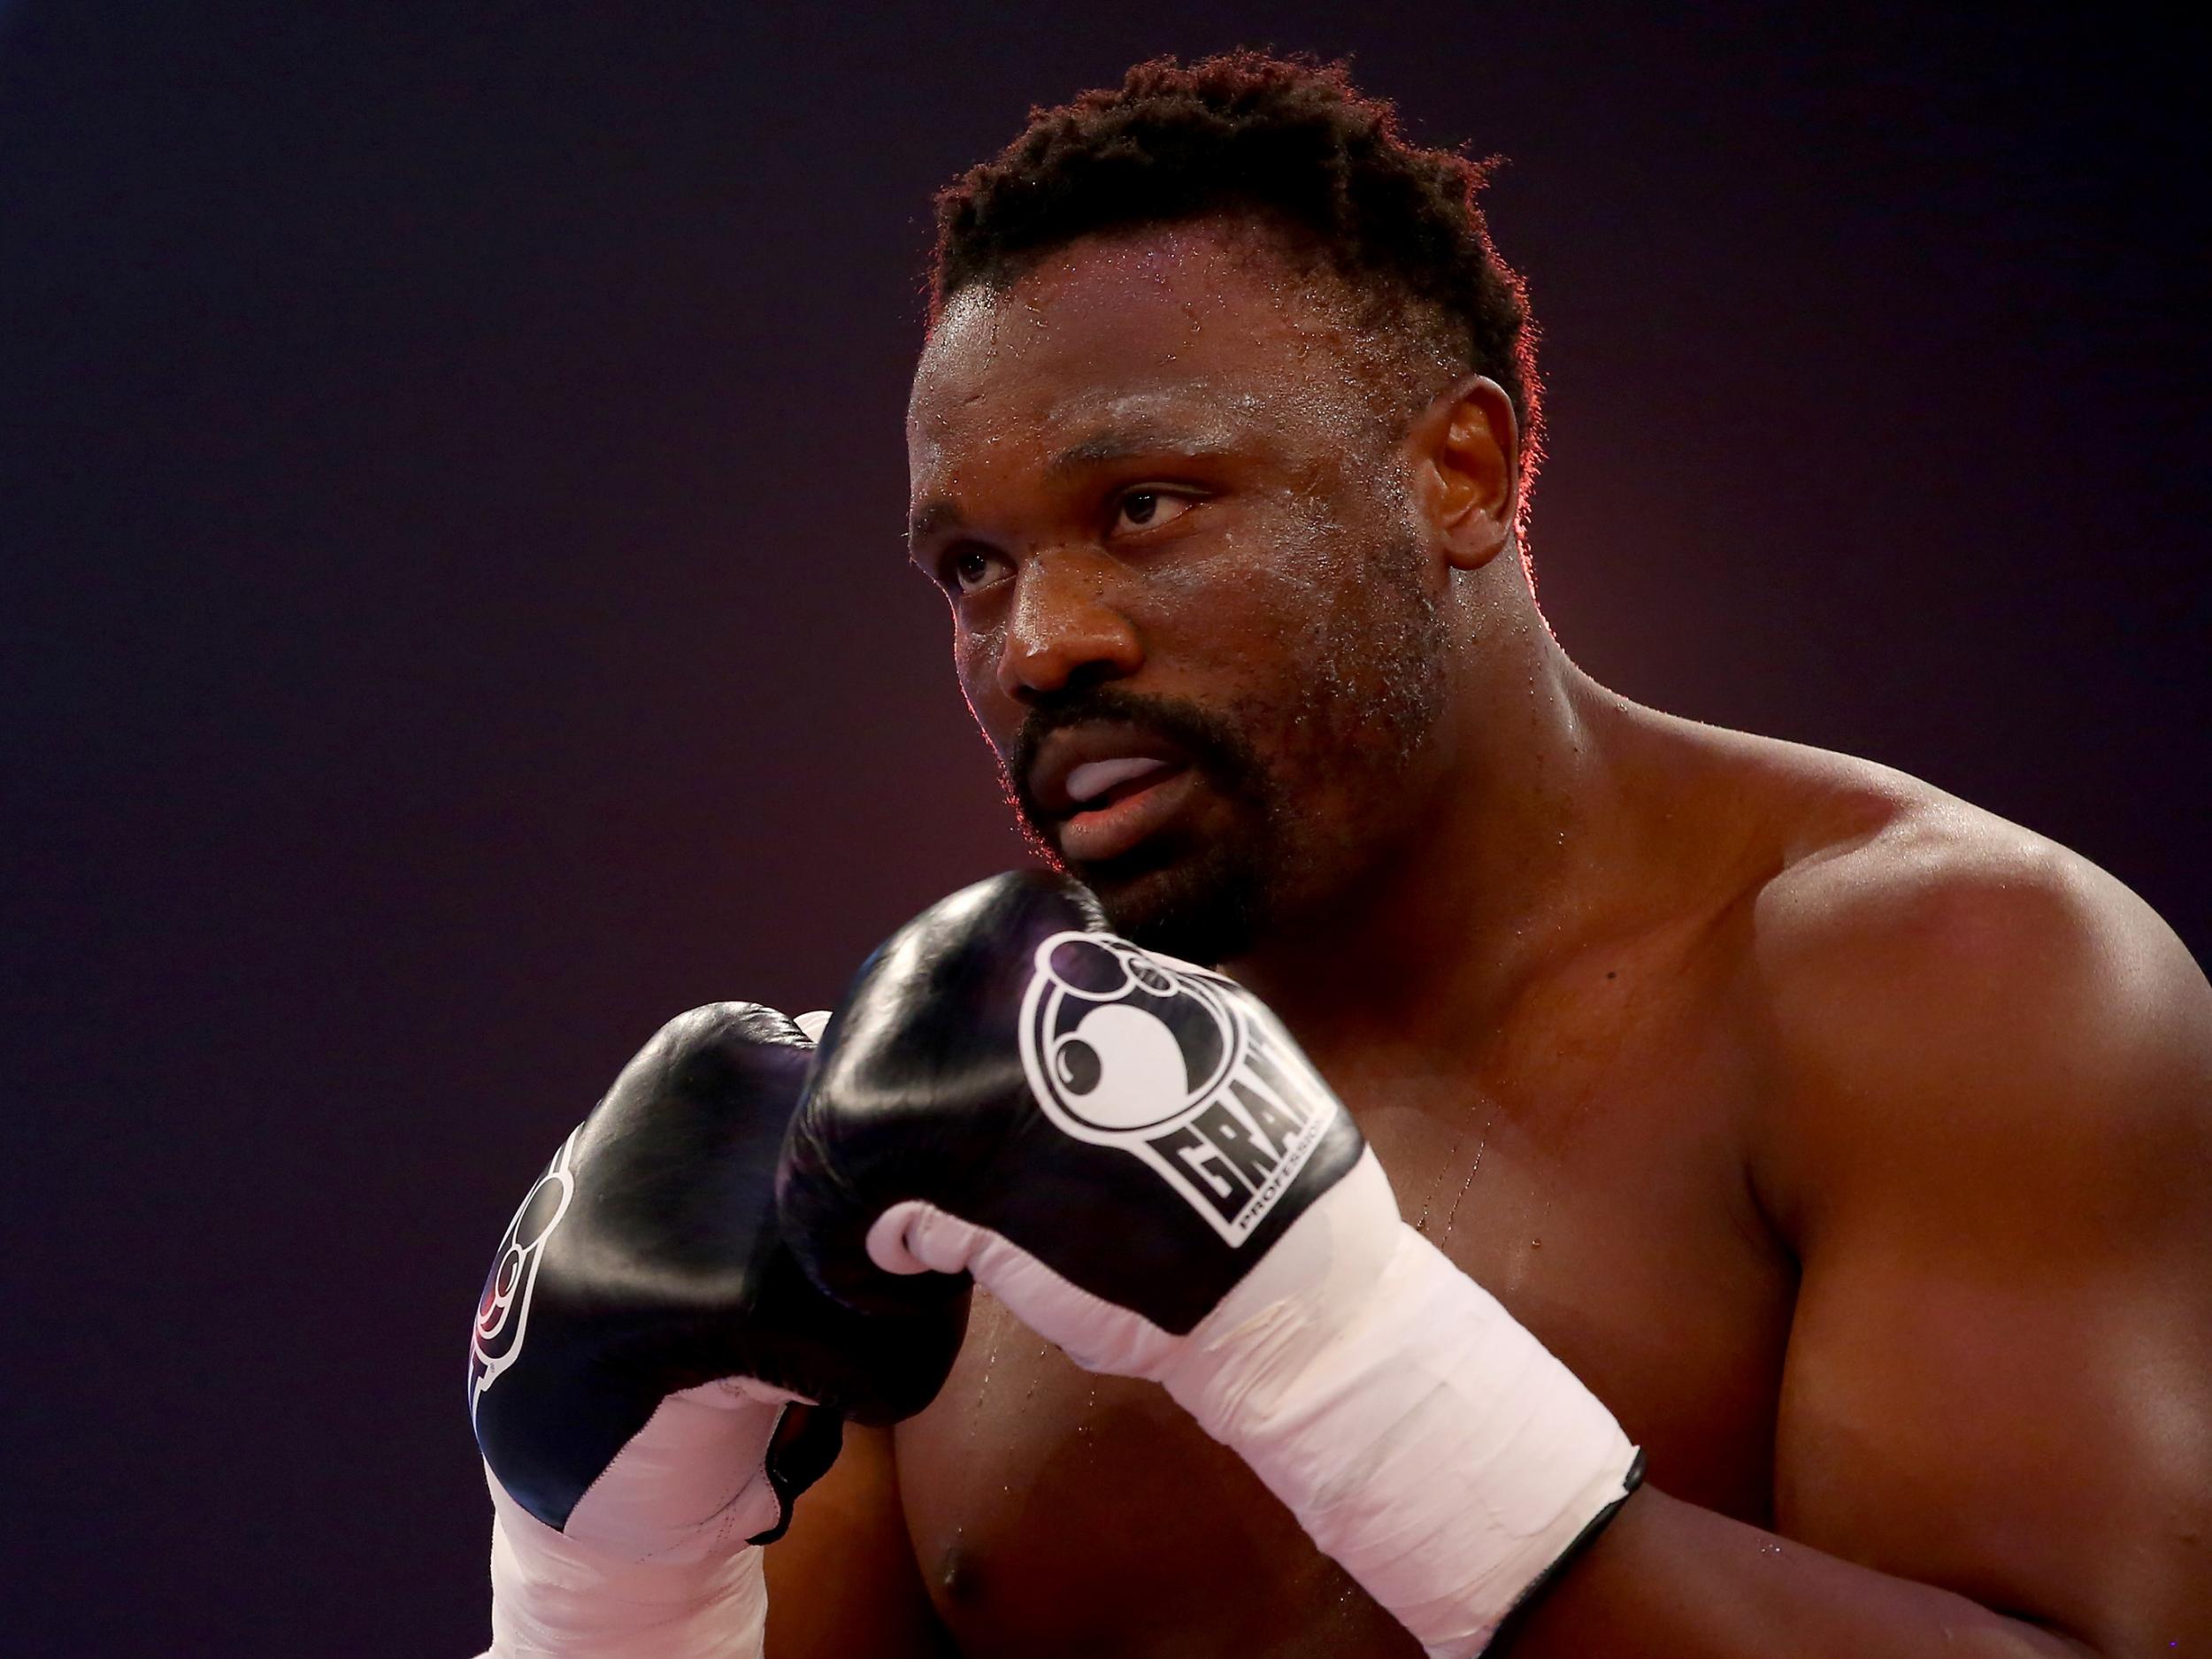 Chisora has lost six fights in his career